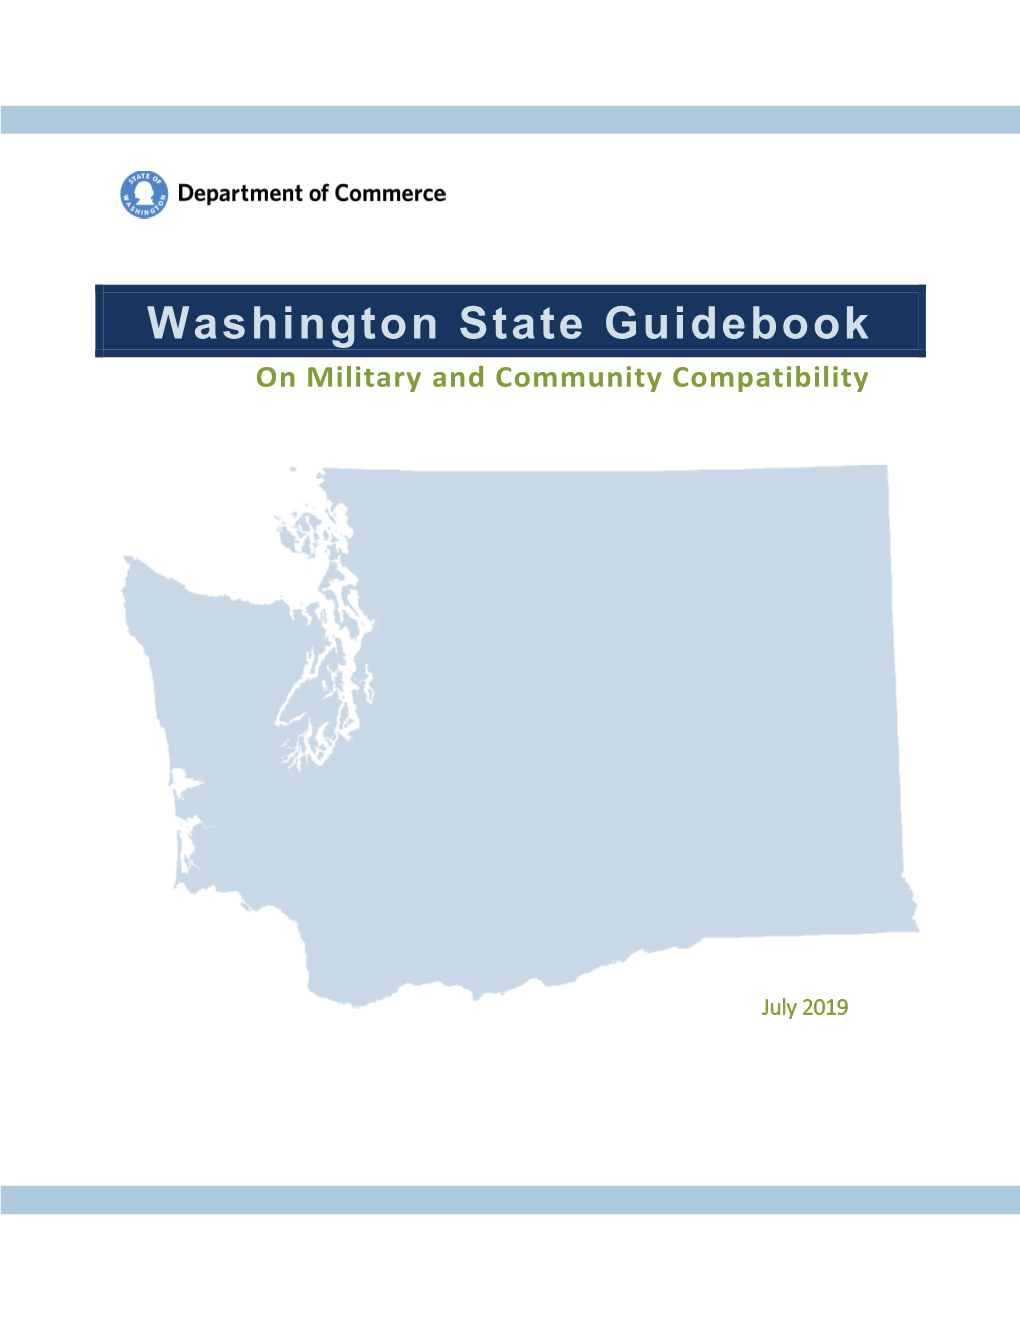 Washington State Guidebook on Military and Community Compatibility